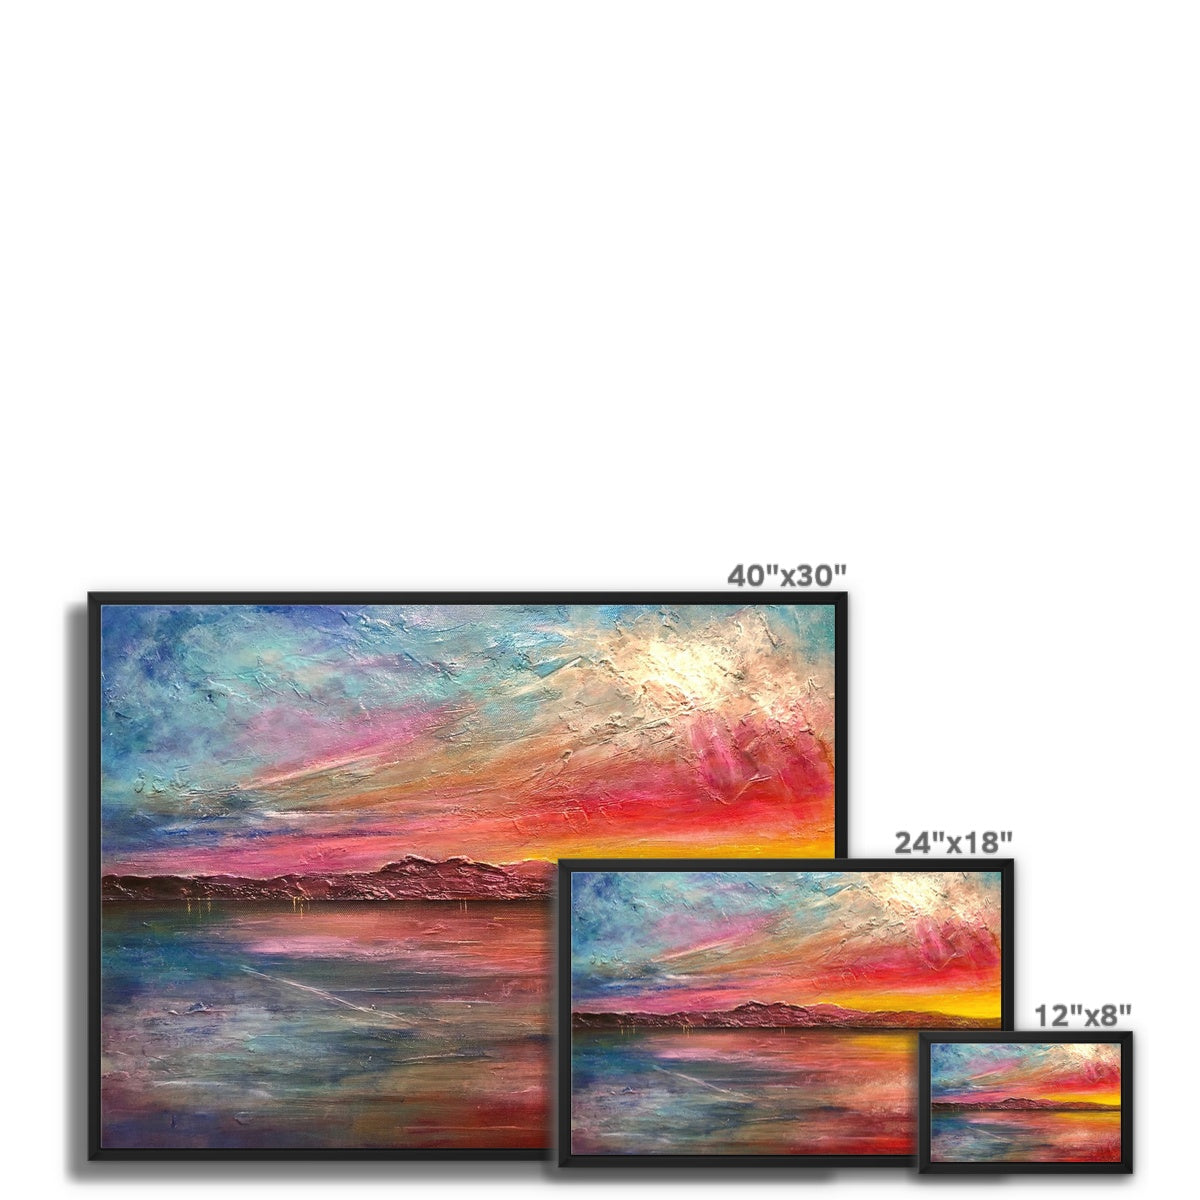 Arran Sunset ii Painting | Framed Canvas From Scotland-Floating Framed Canvas Prints-Arran Art Gallery-Paintings, Prints, Homeware, Art Gifts From Scotland By Scottish Artist Kevin Hunter